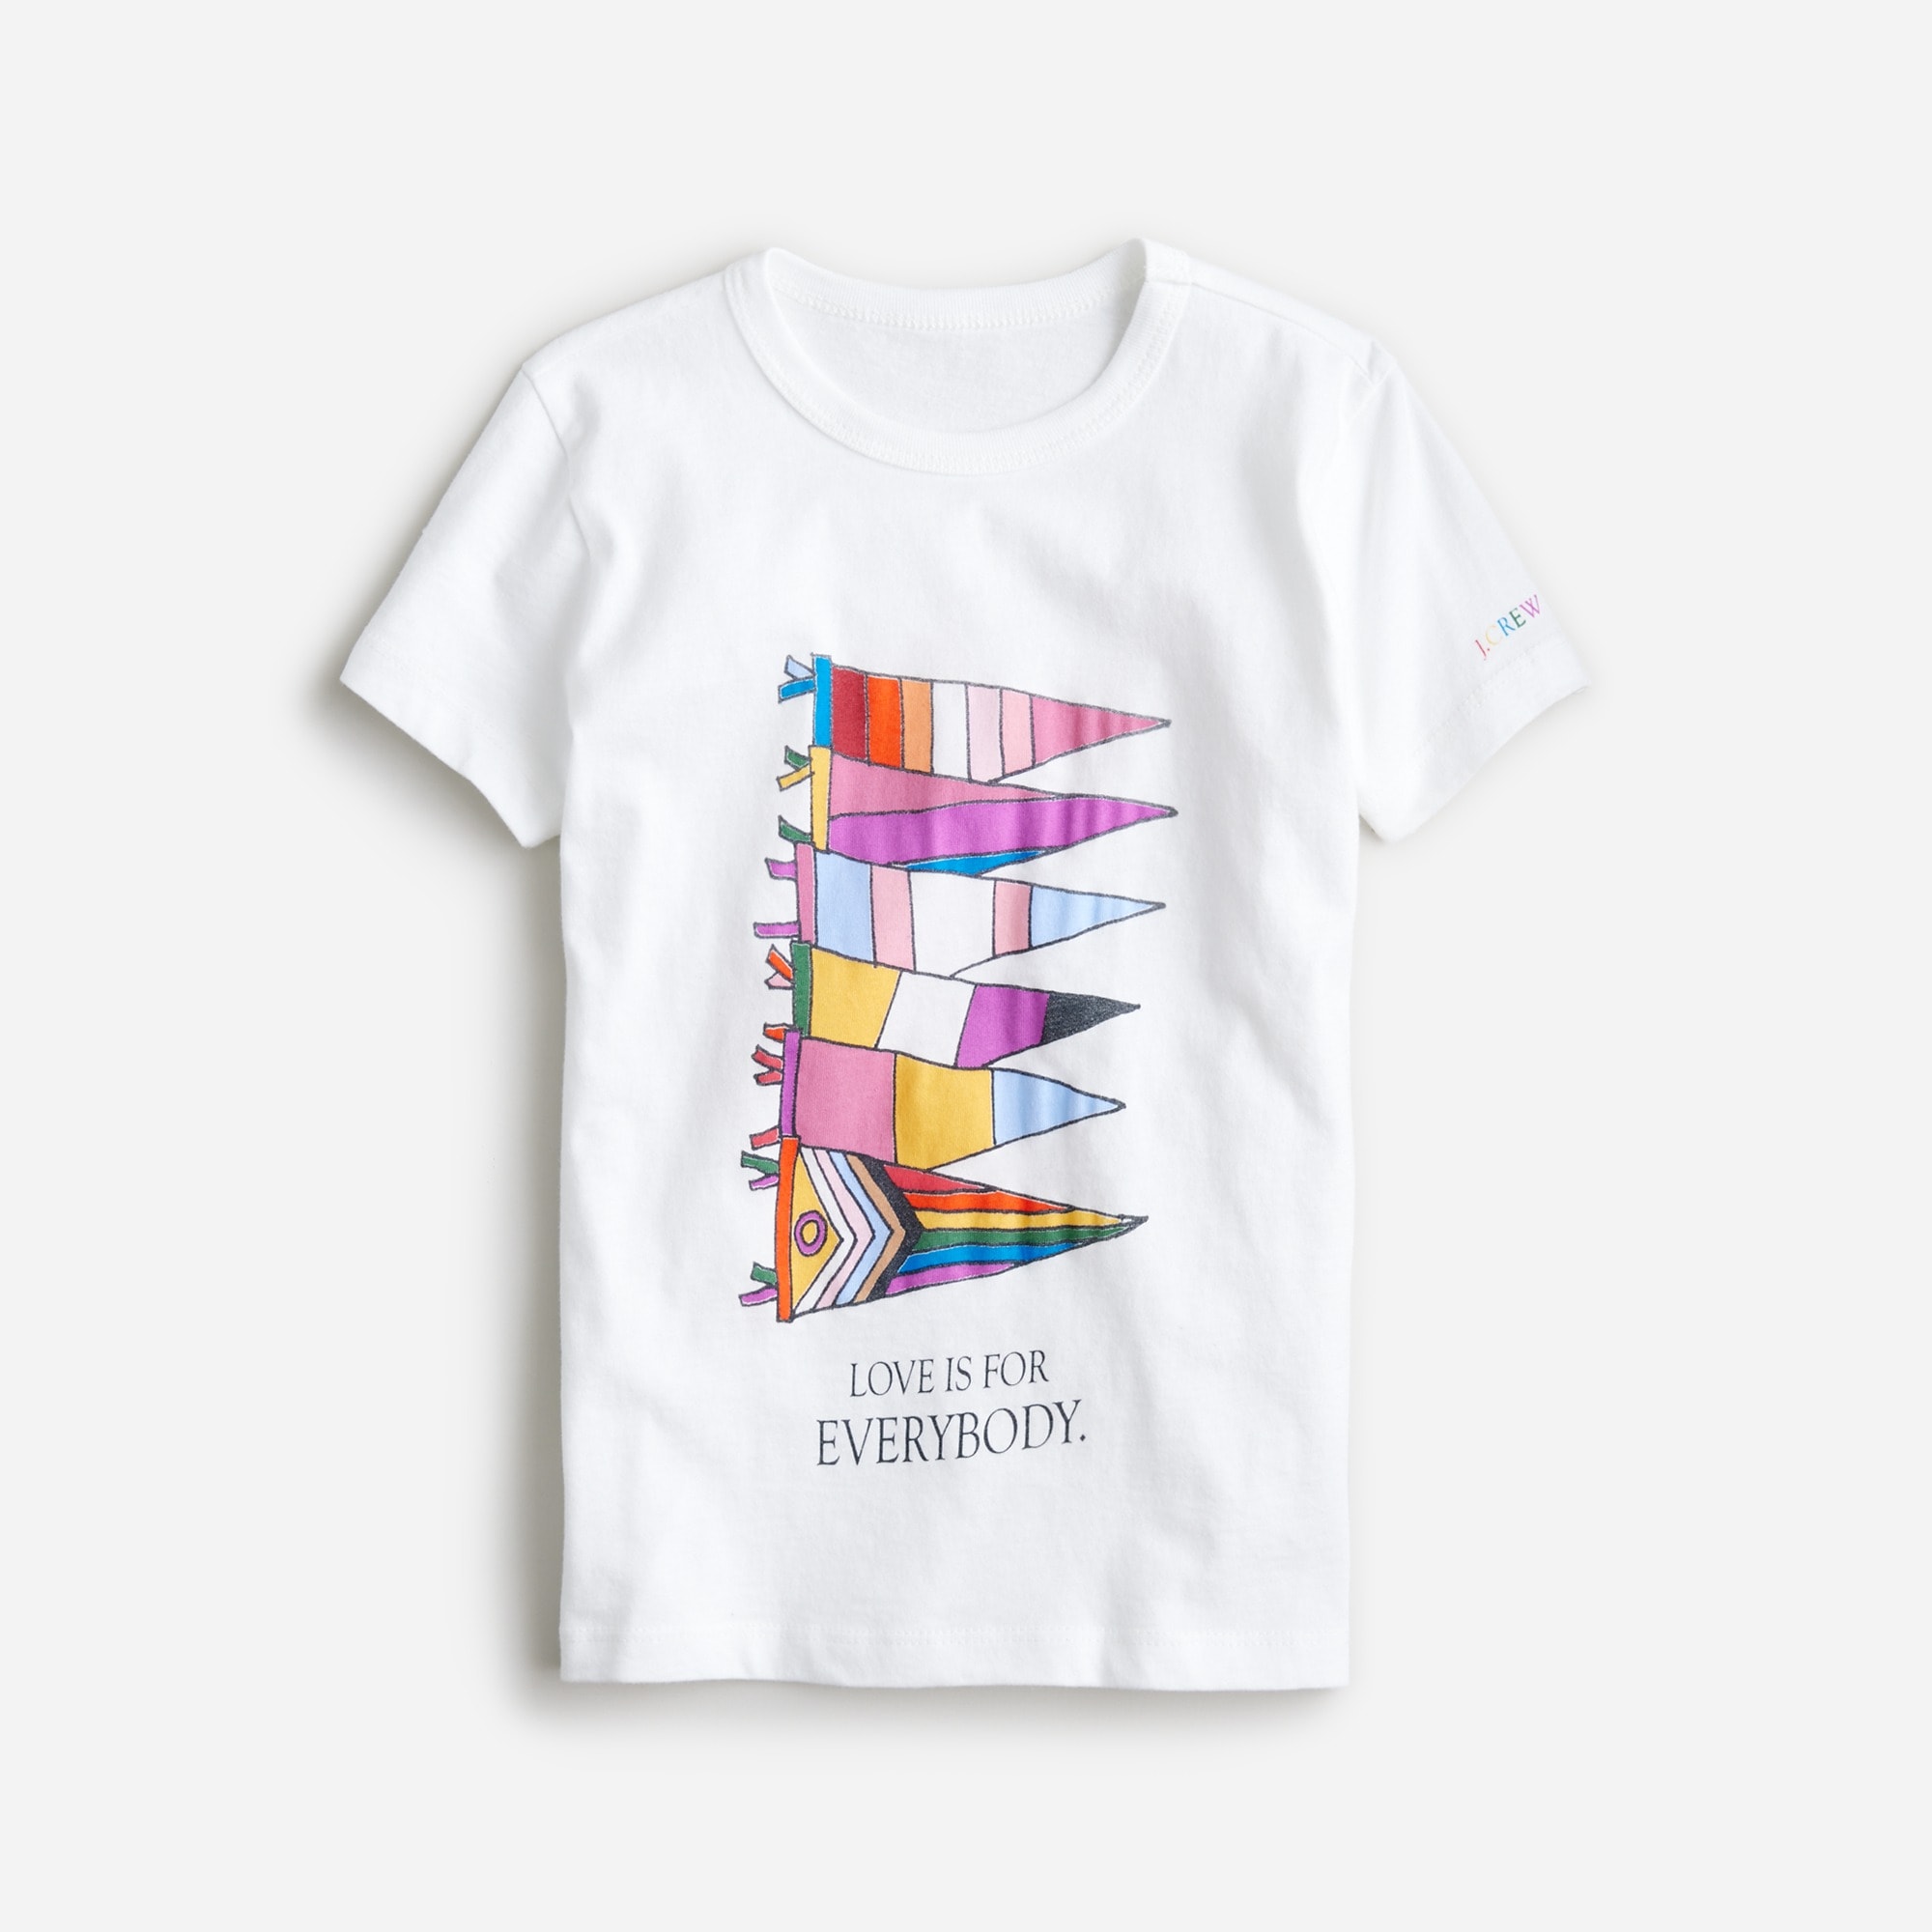  Kids' made-in-the-USA Pride graphic T-shirt